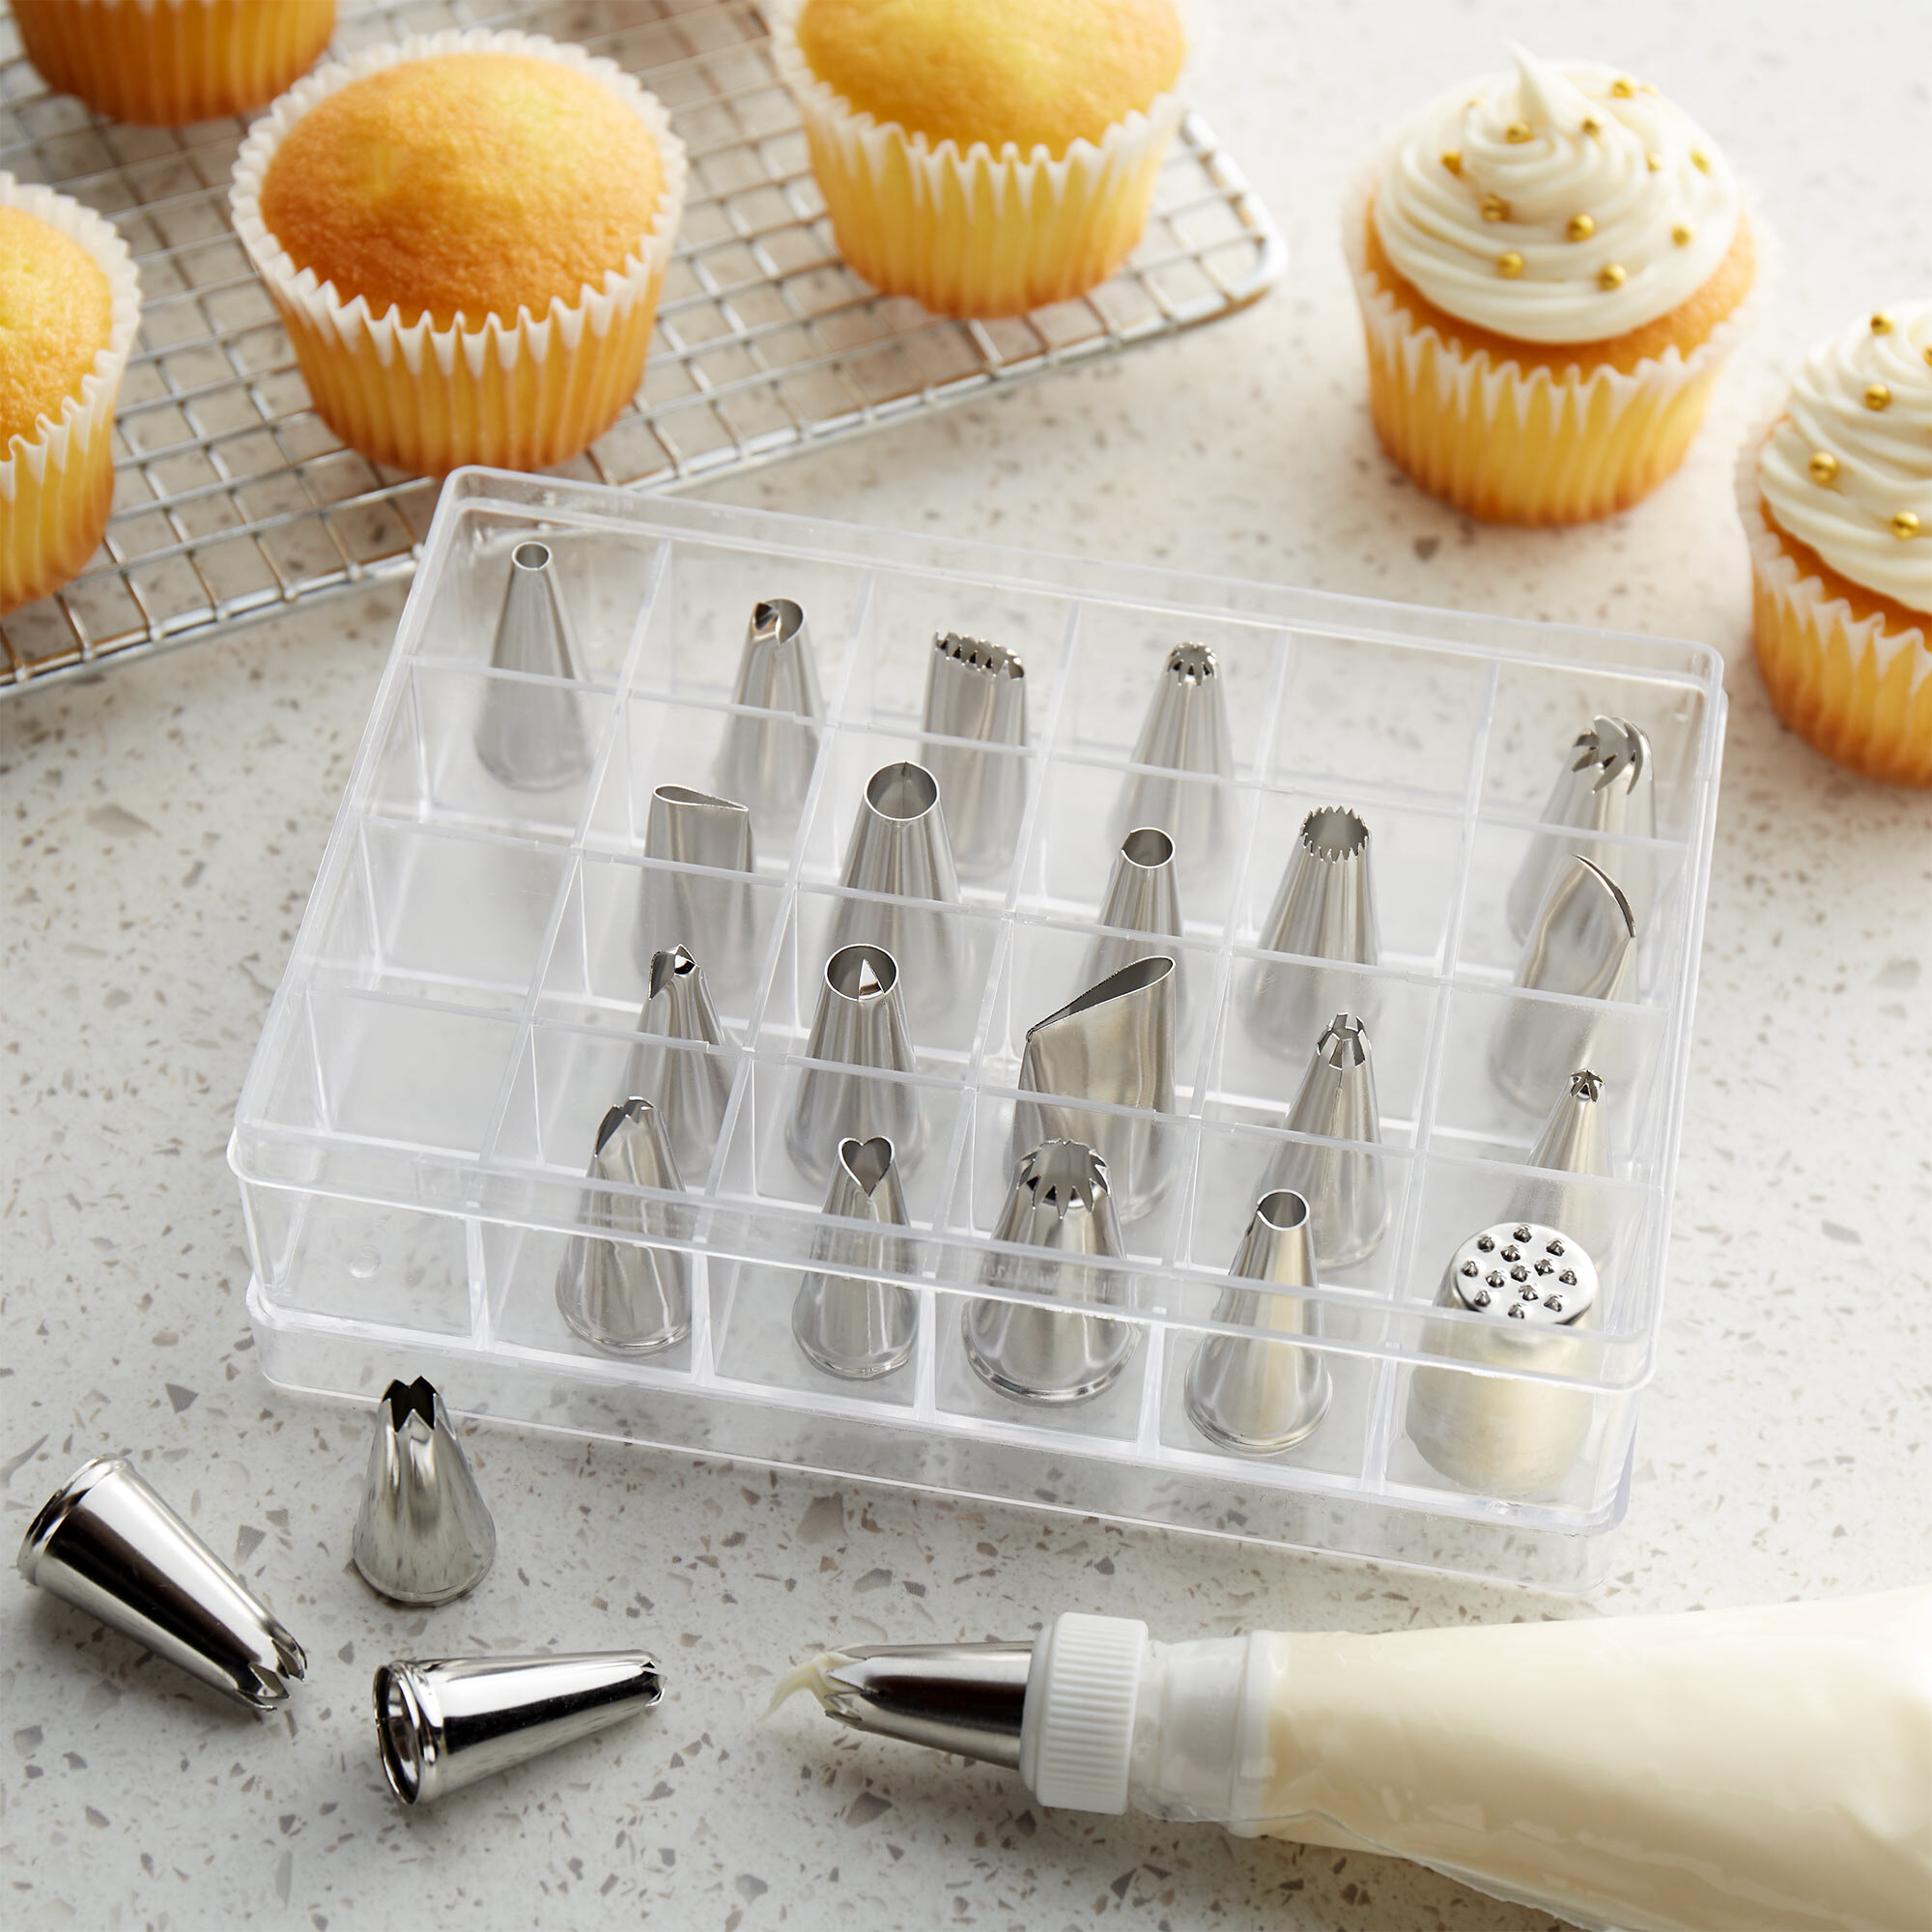 A piping tip set and piping bag with cupcakes on a counter.